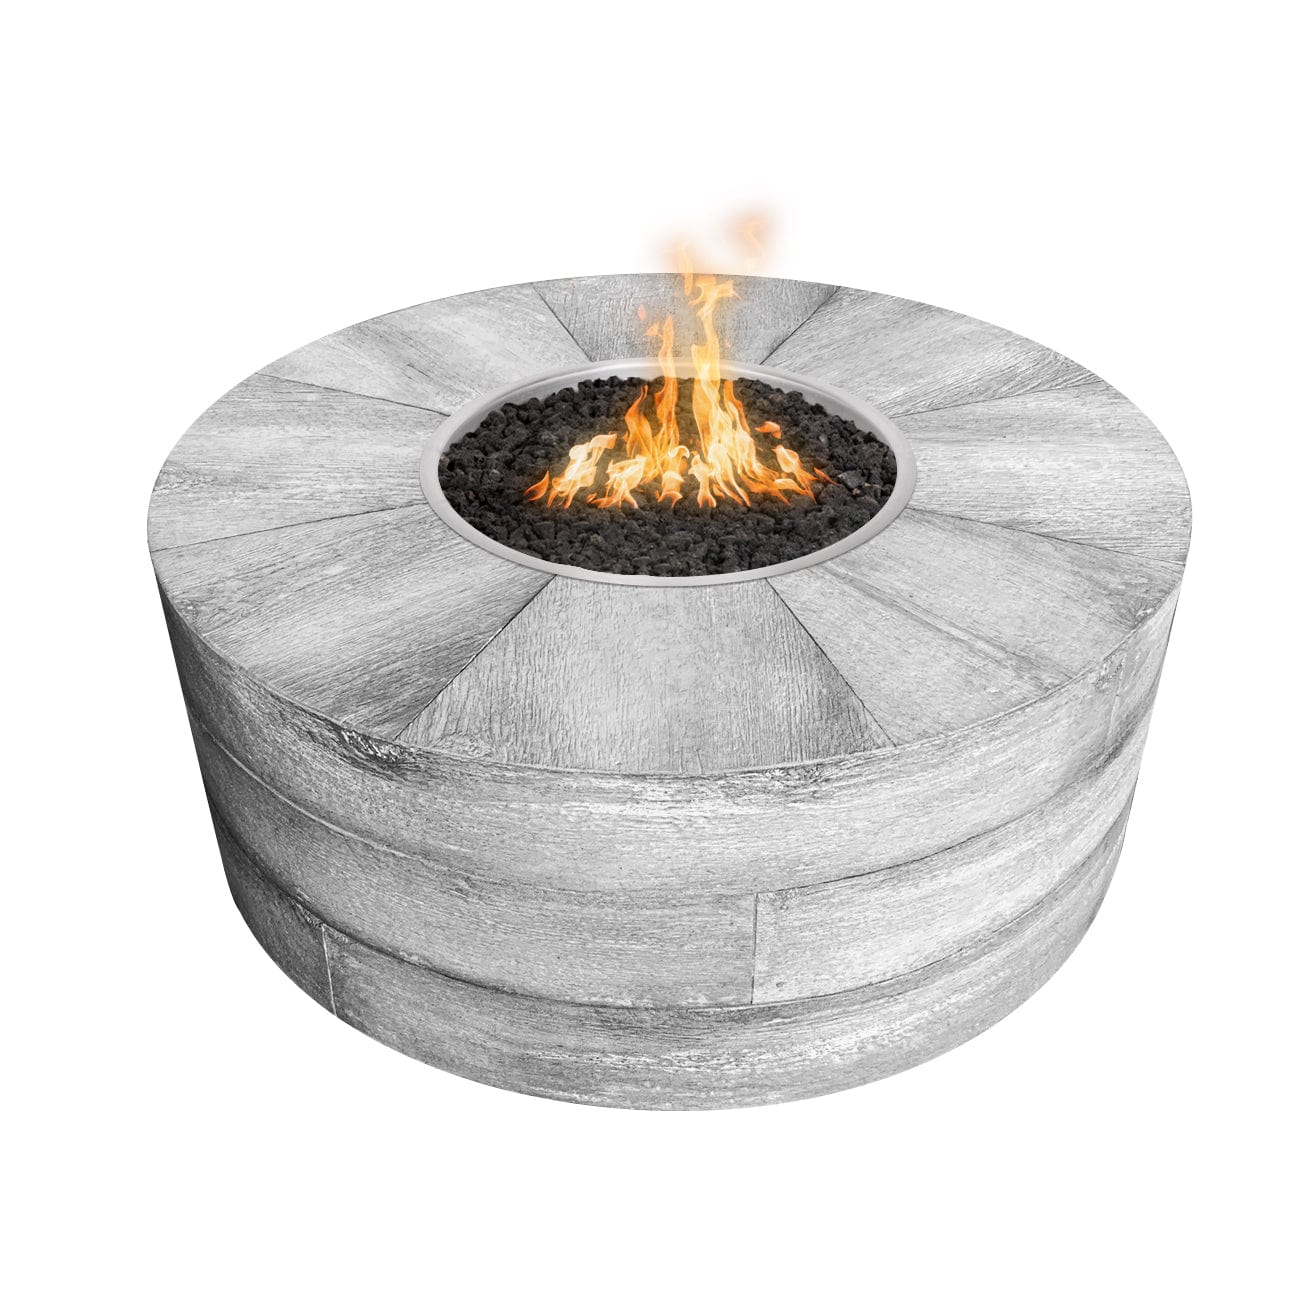 The Outdoor Plus Fire Pit 16" Tall / 42" / Low Voltage Electronic Ignition The Outdoor Plus Sequoia  Fire Pit | Wood Grain OPT-SEQ42LWE12V